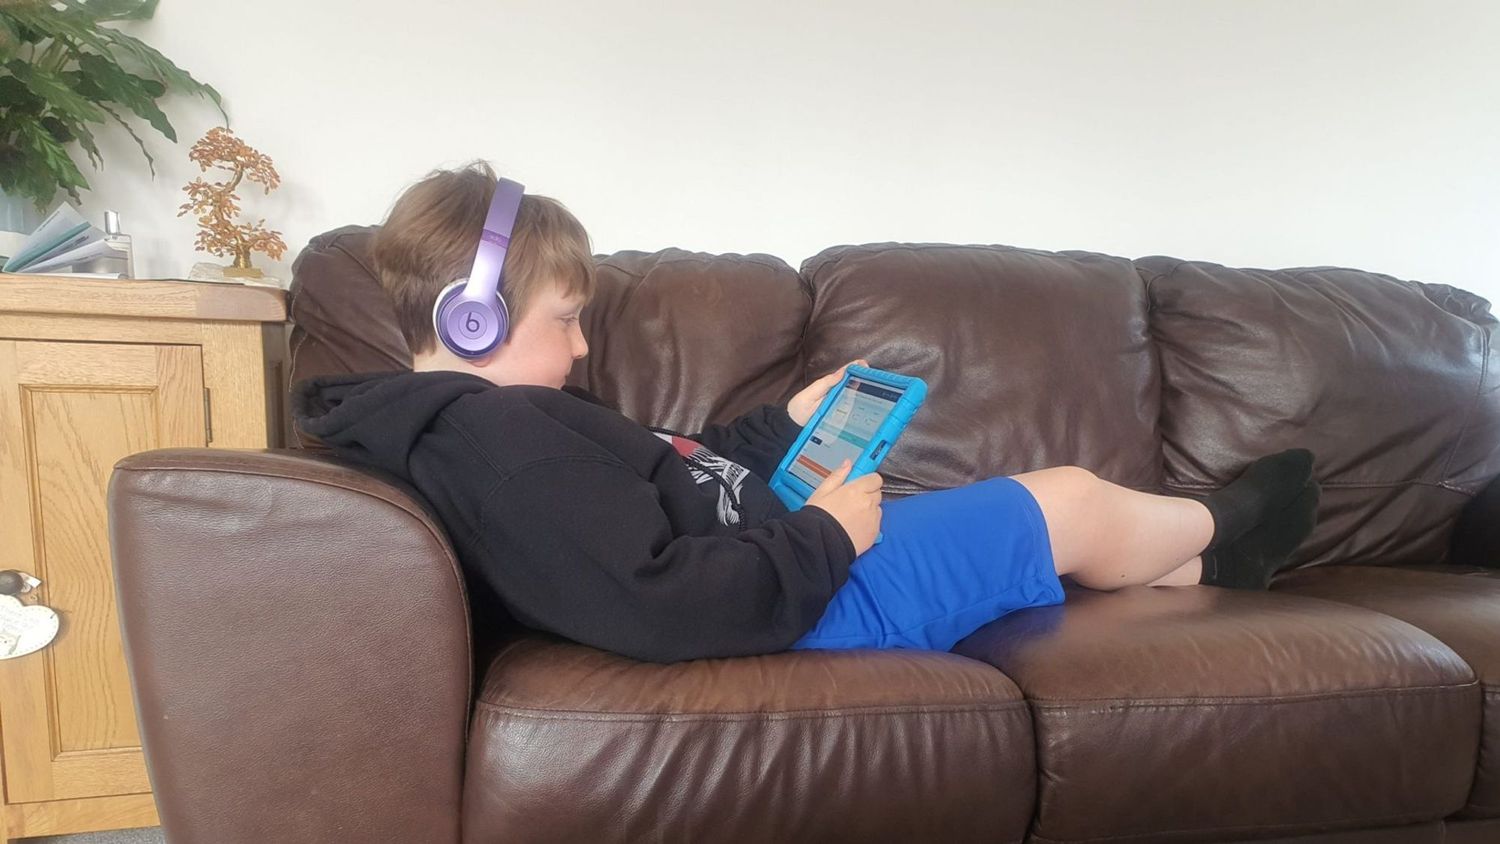 A home learner doing Bedrock on a tablet